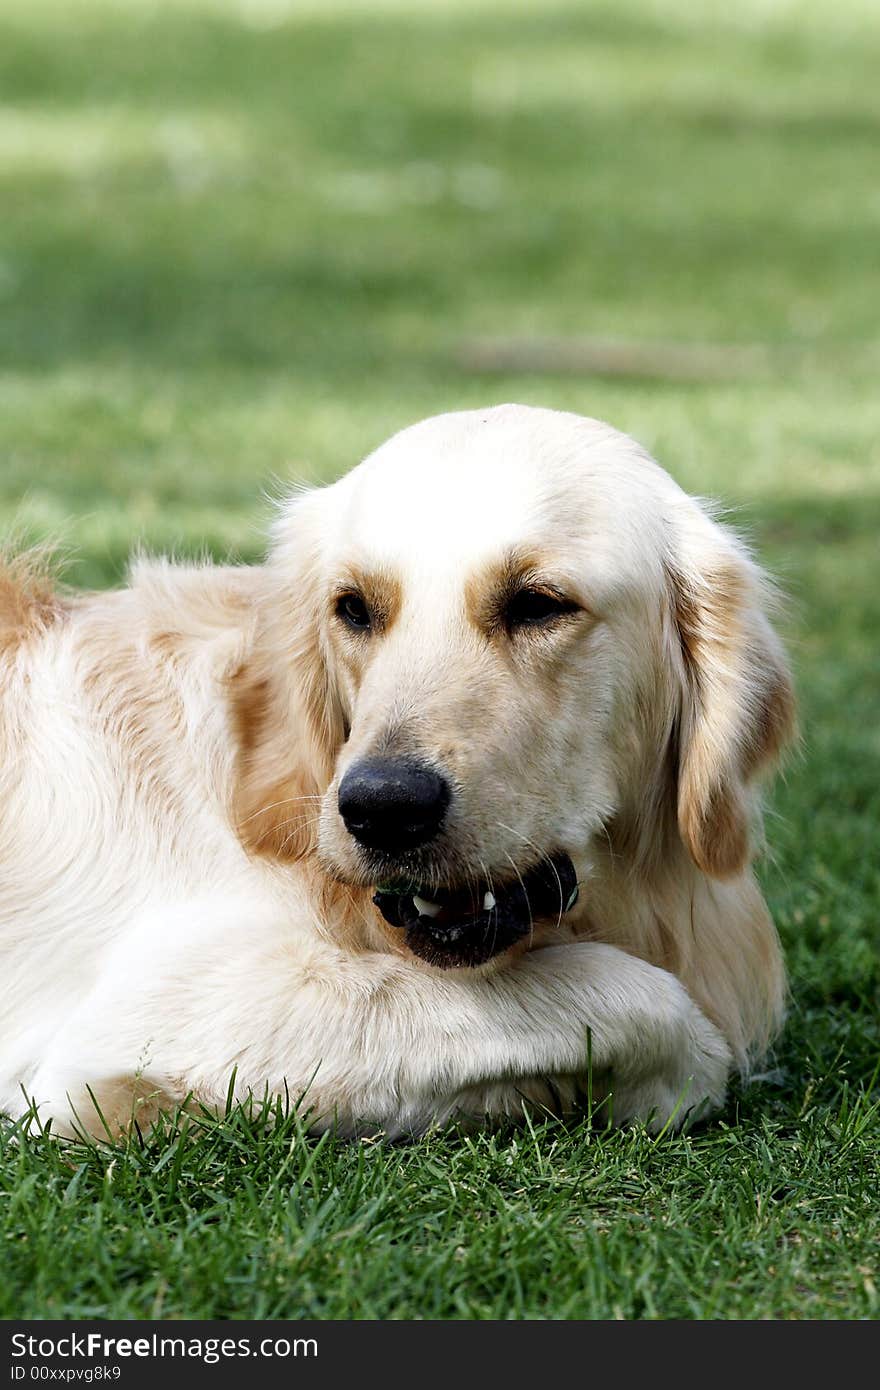 Golden retriever is a little tired, it is having a rest on the meadow at this moment